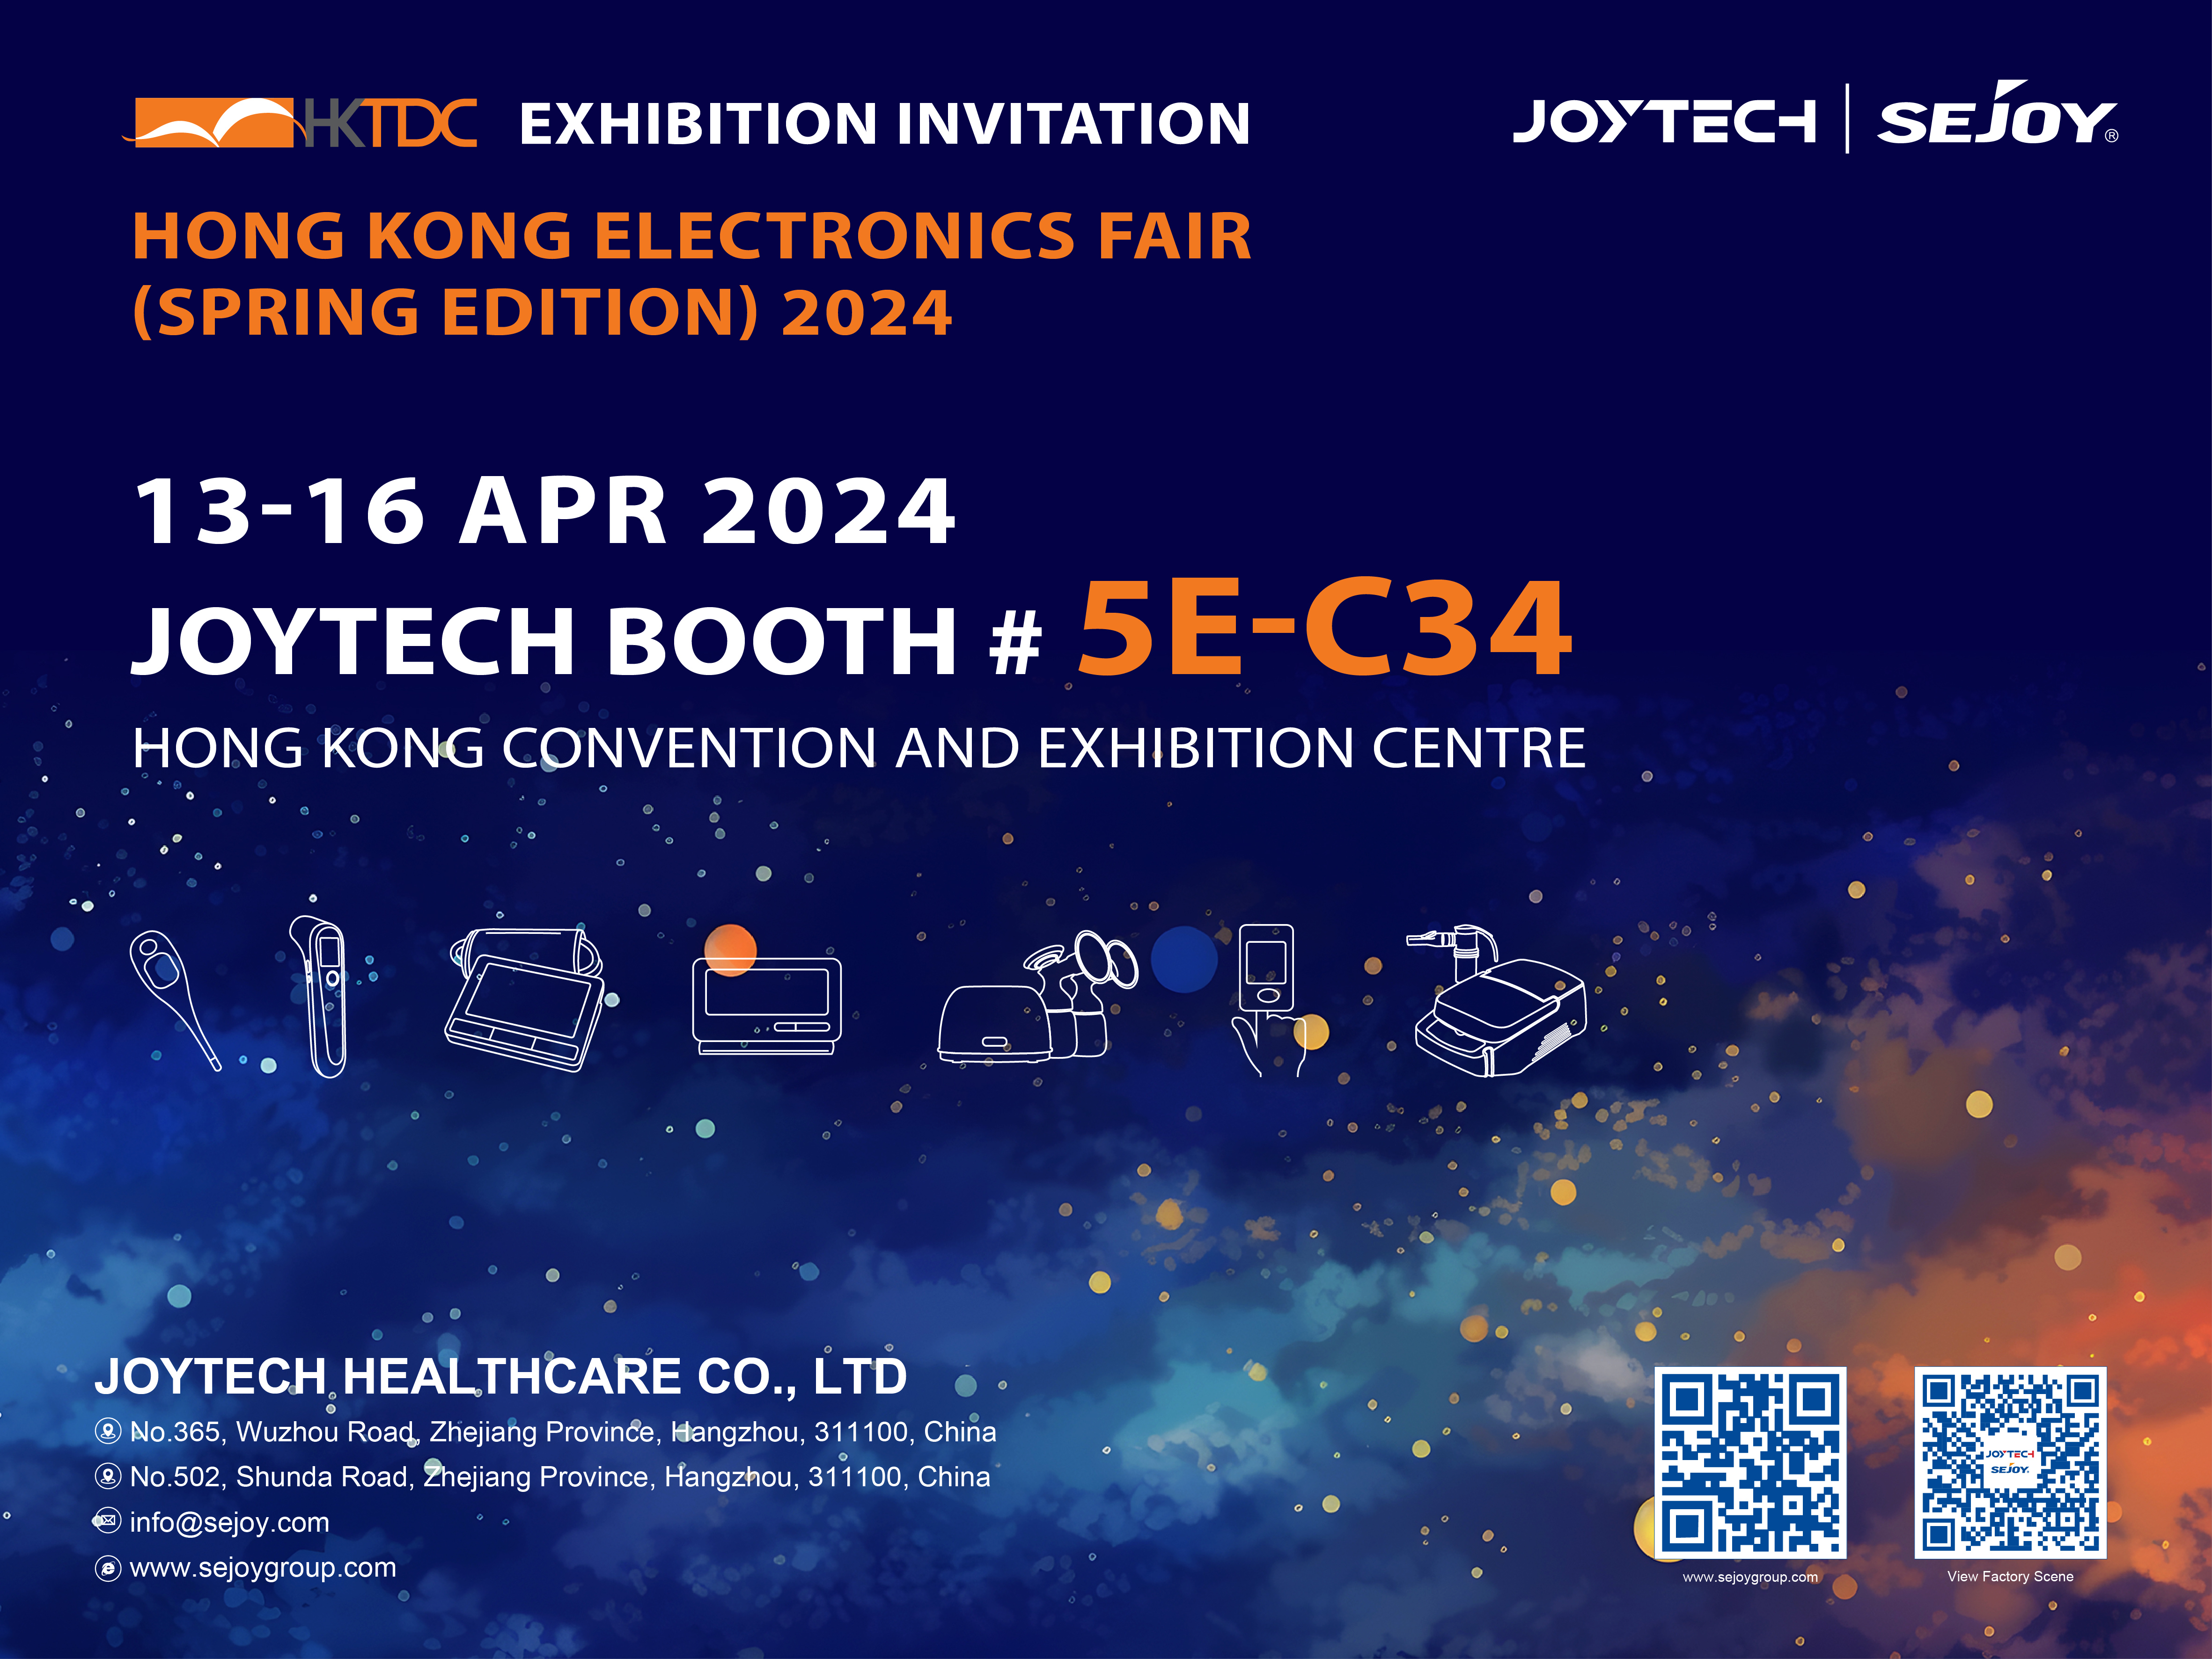 Invitation to Explore Our Innovative Healthcare Solutions at the Hong Kong Electronics Fair